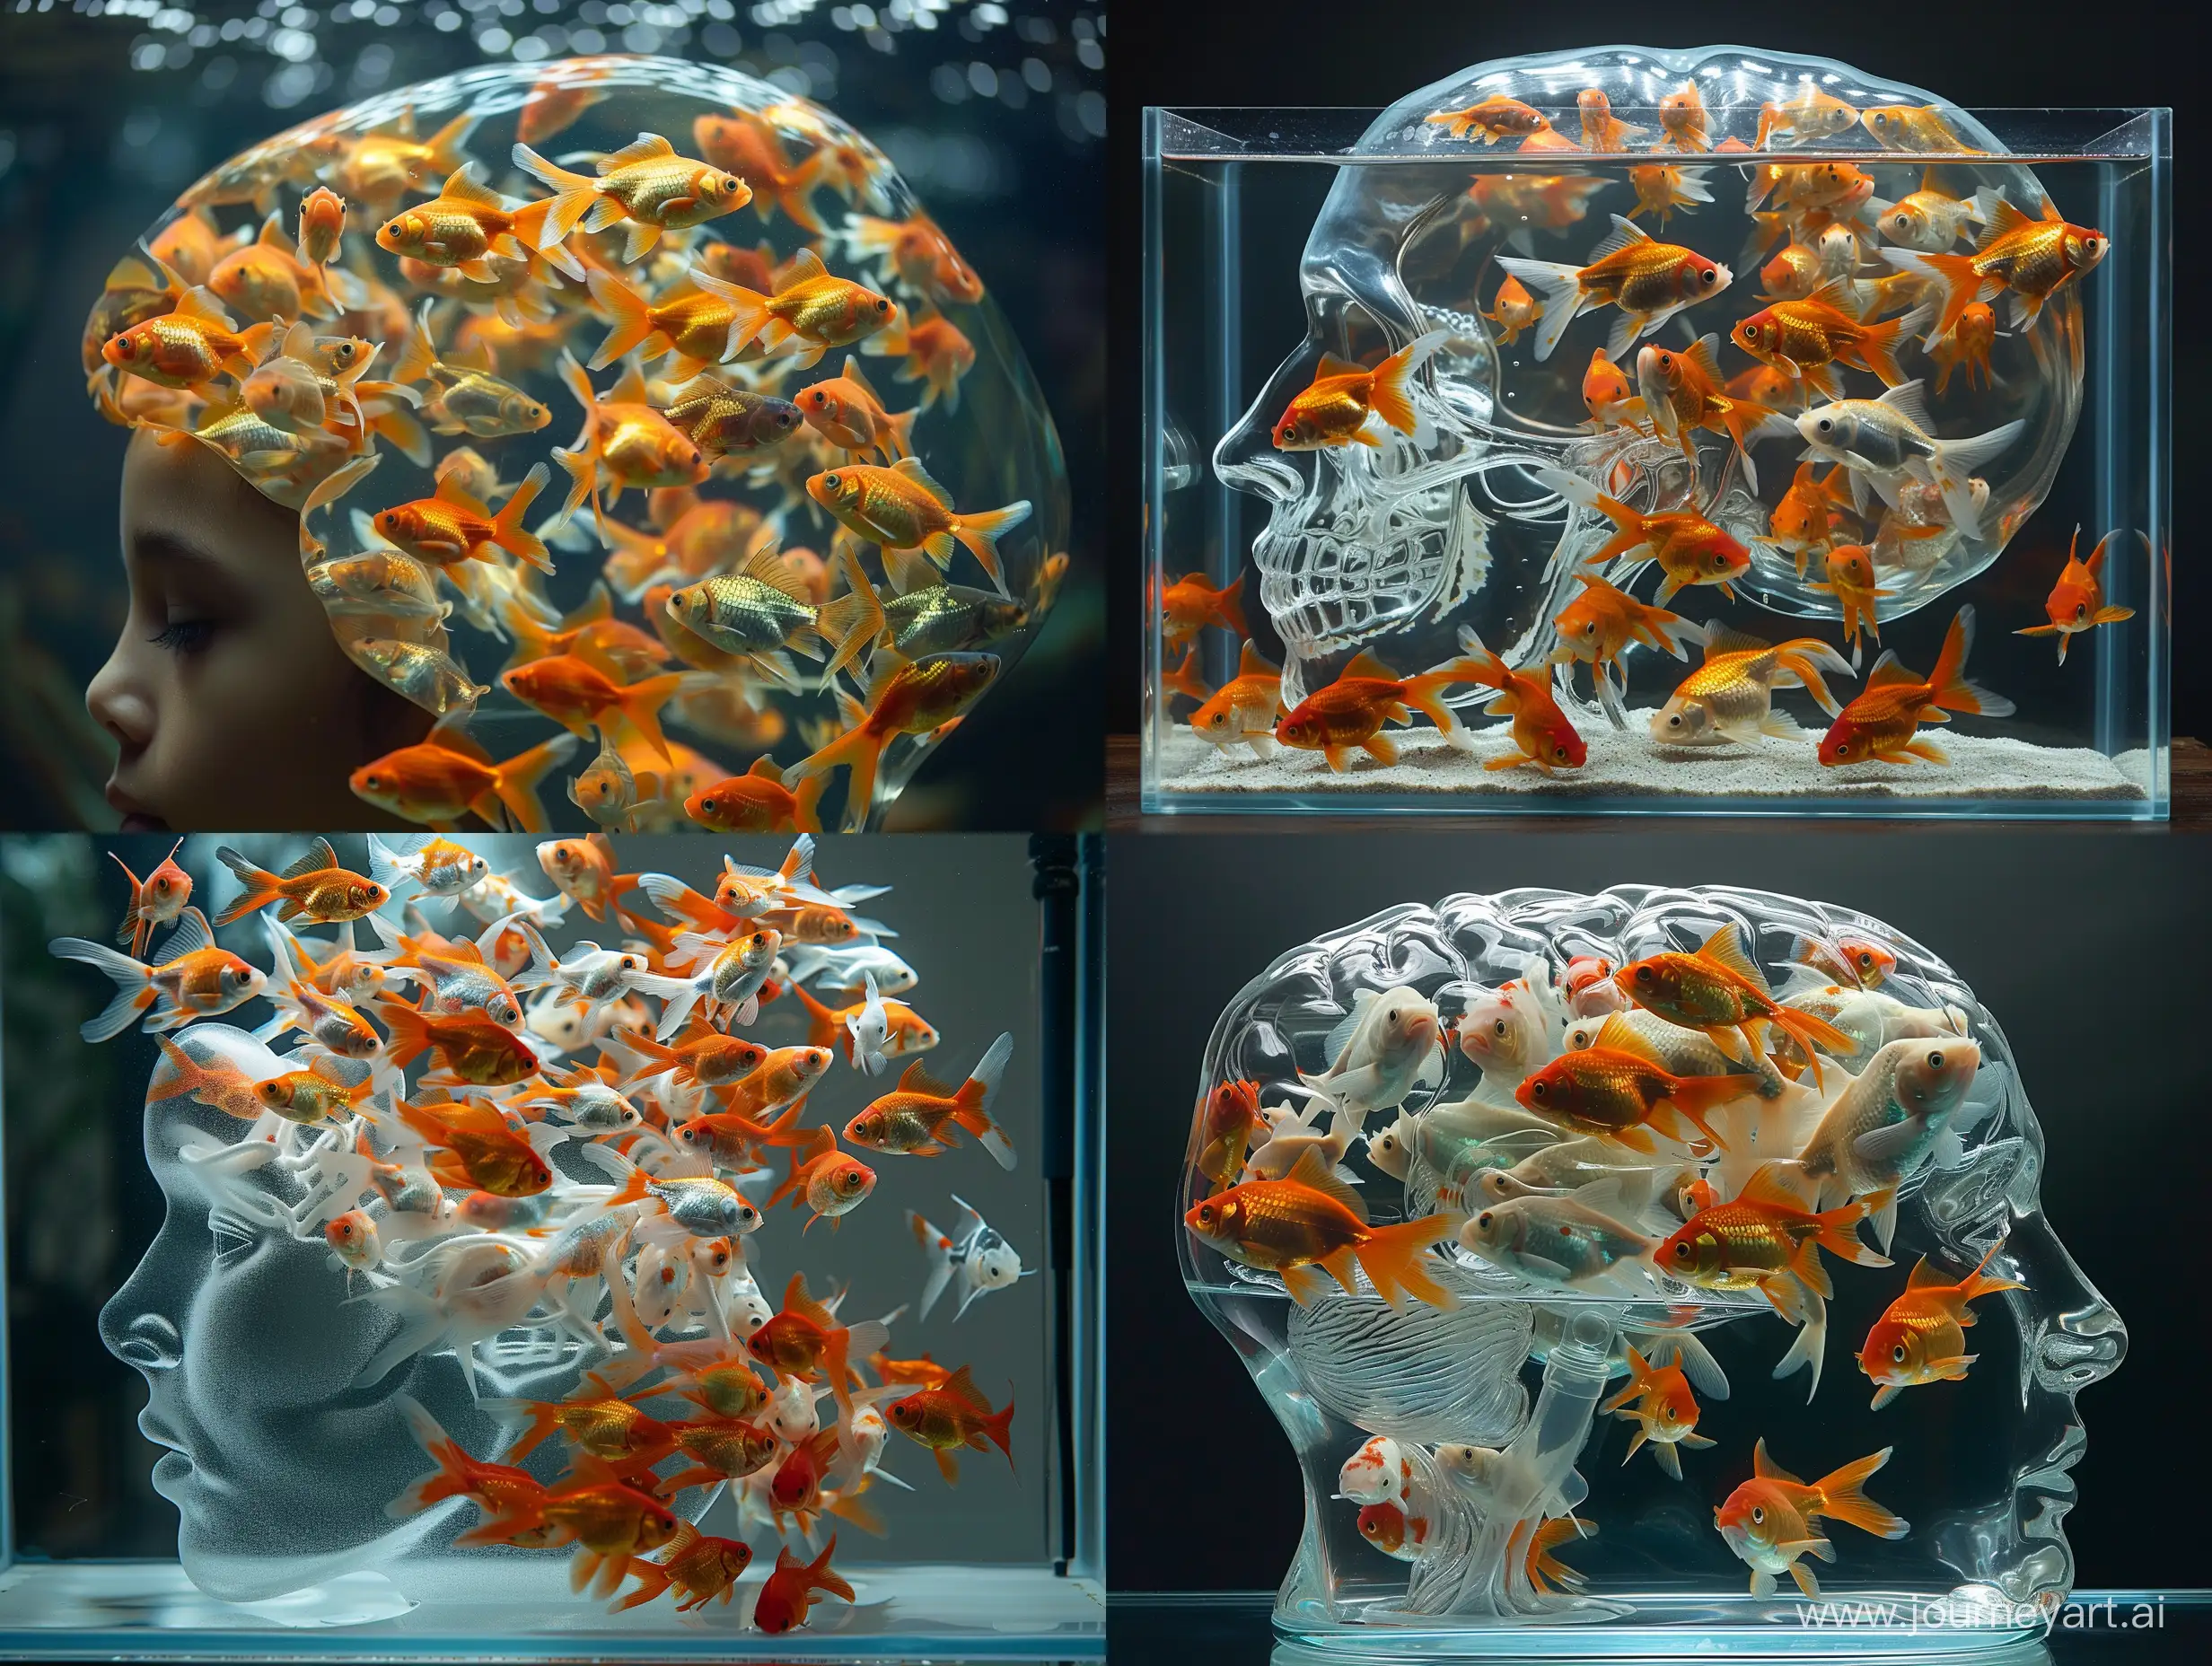 A perfectly human shaped aquarium is filled with goldfish swimming —stylize 250